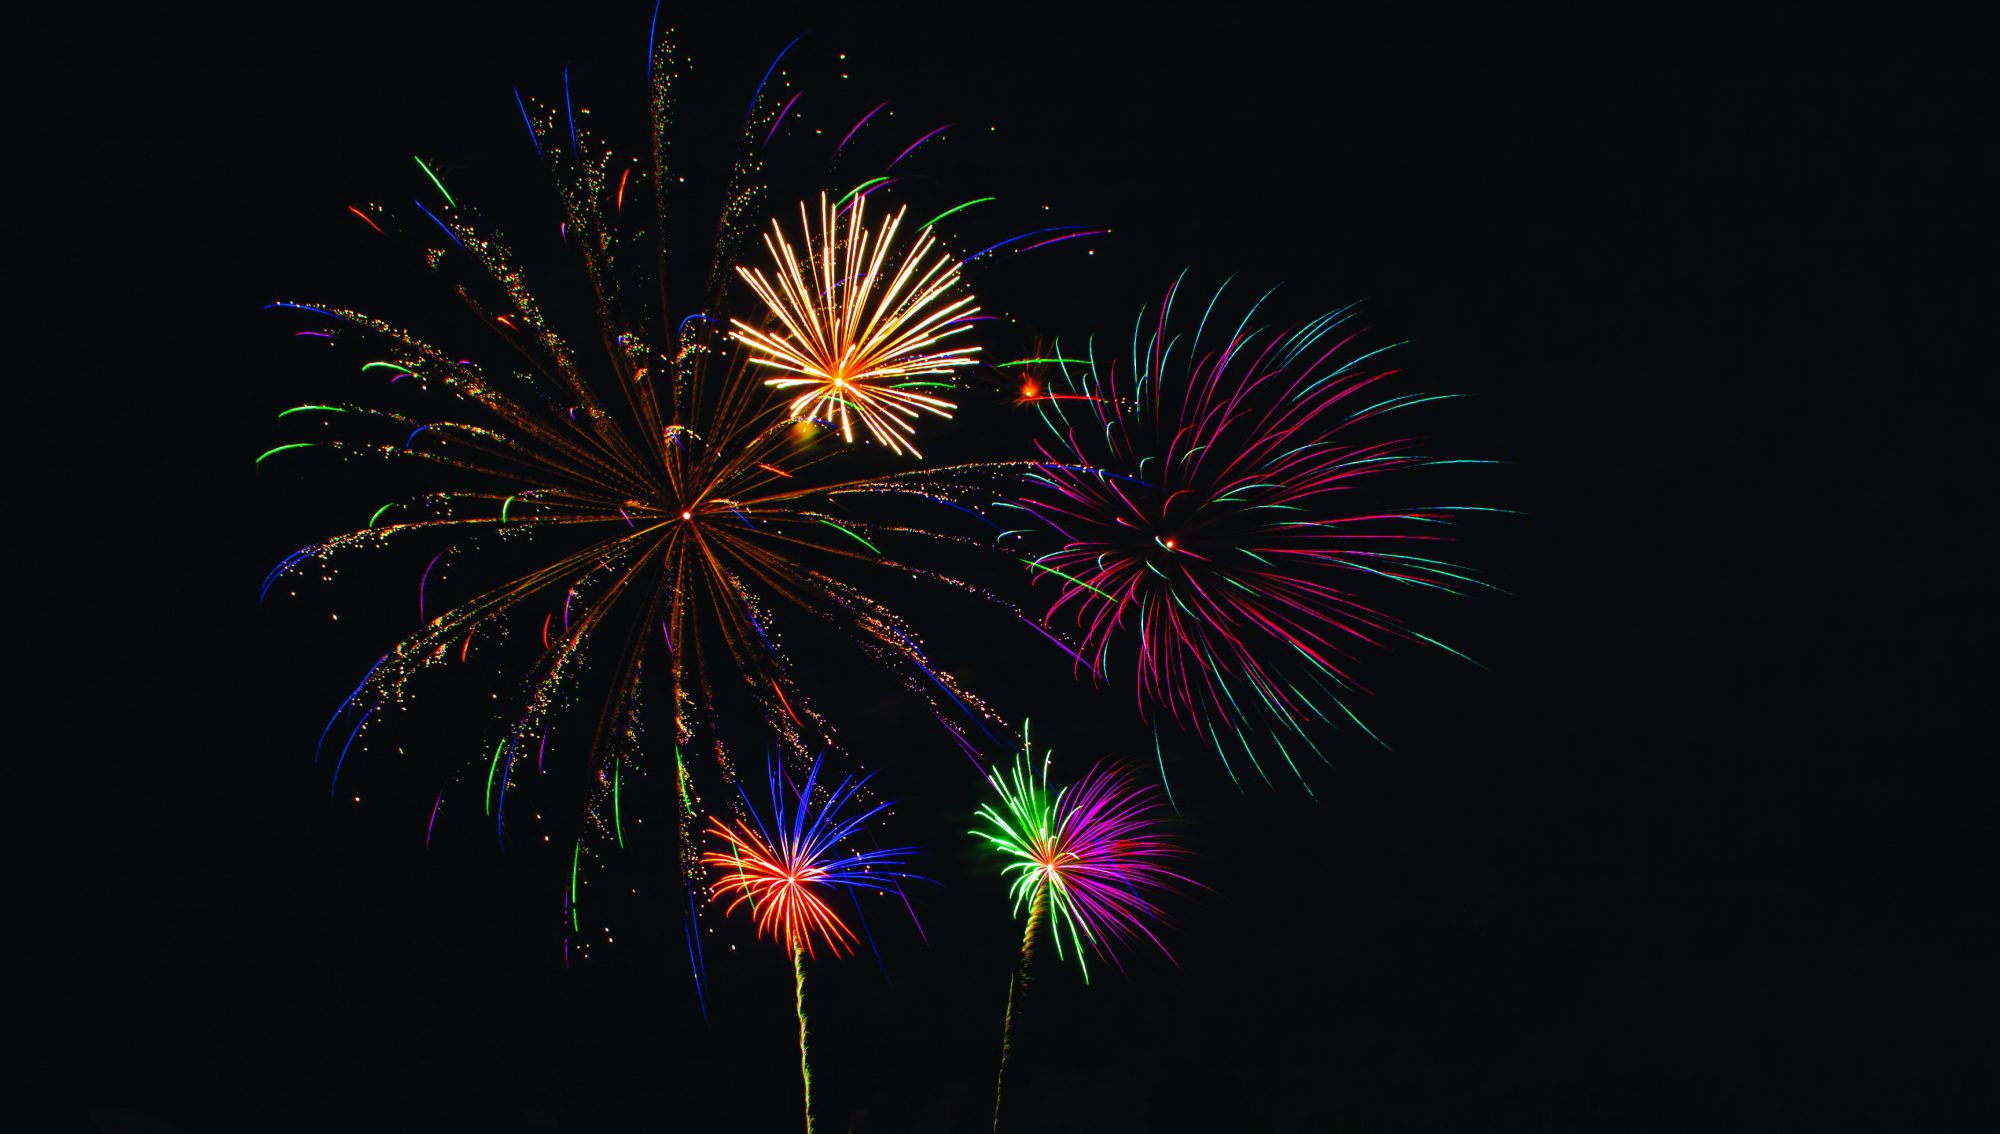 Mount Forest Fireworks Festival - Mount Forest, ON, Canada